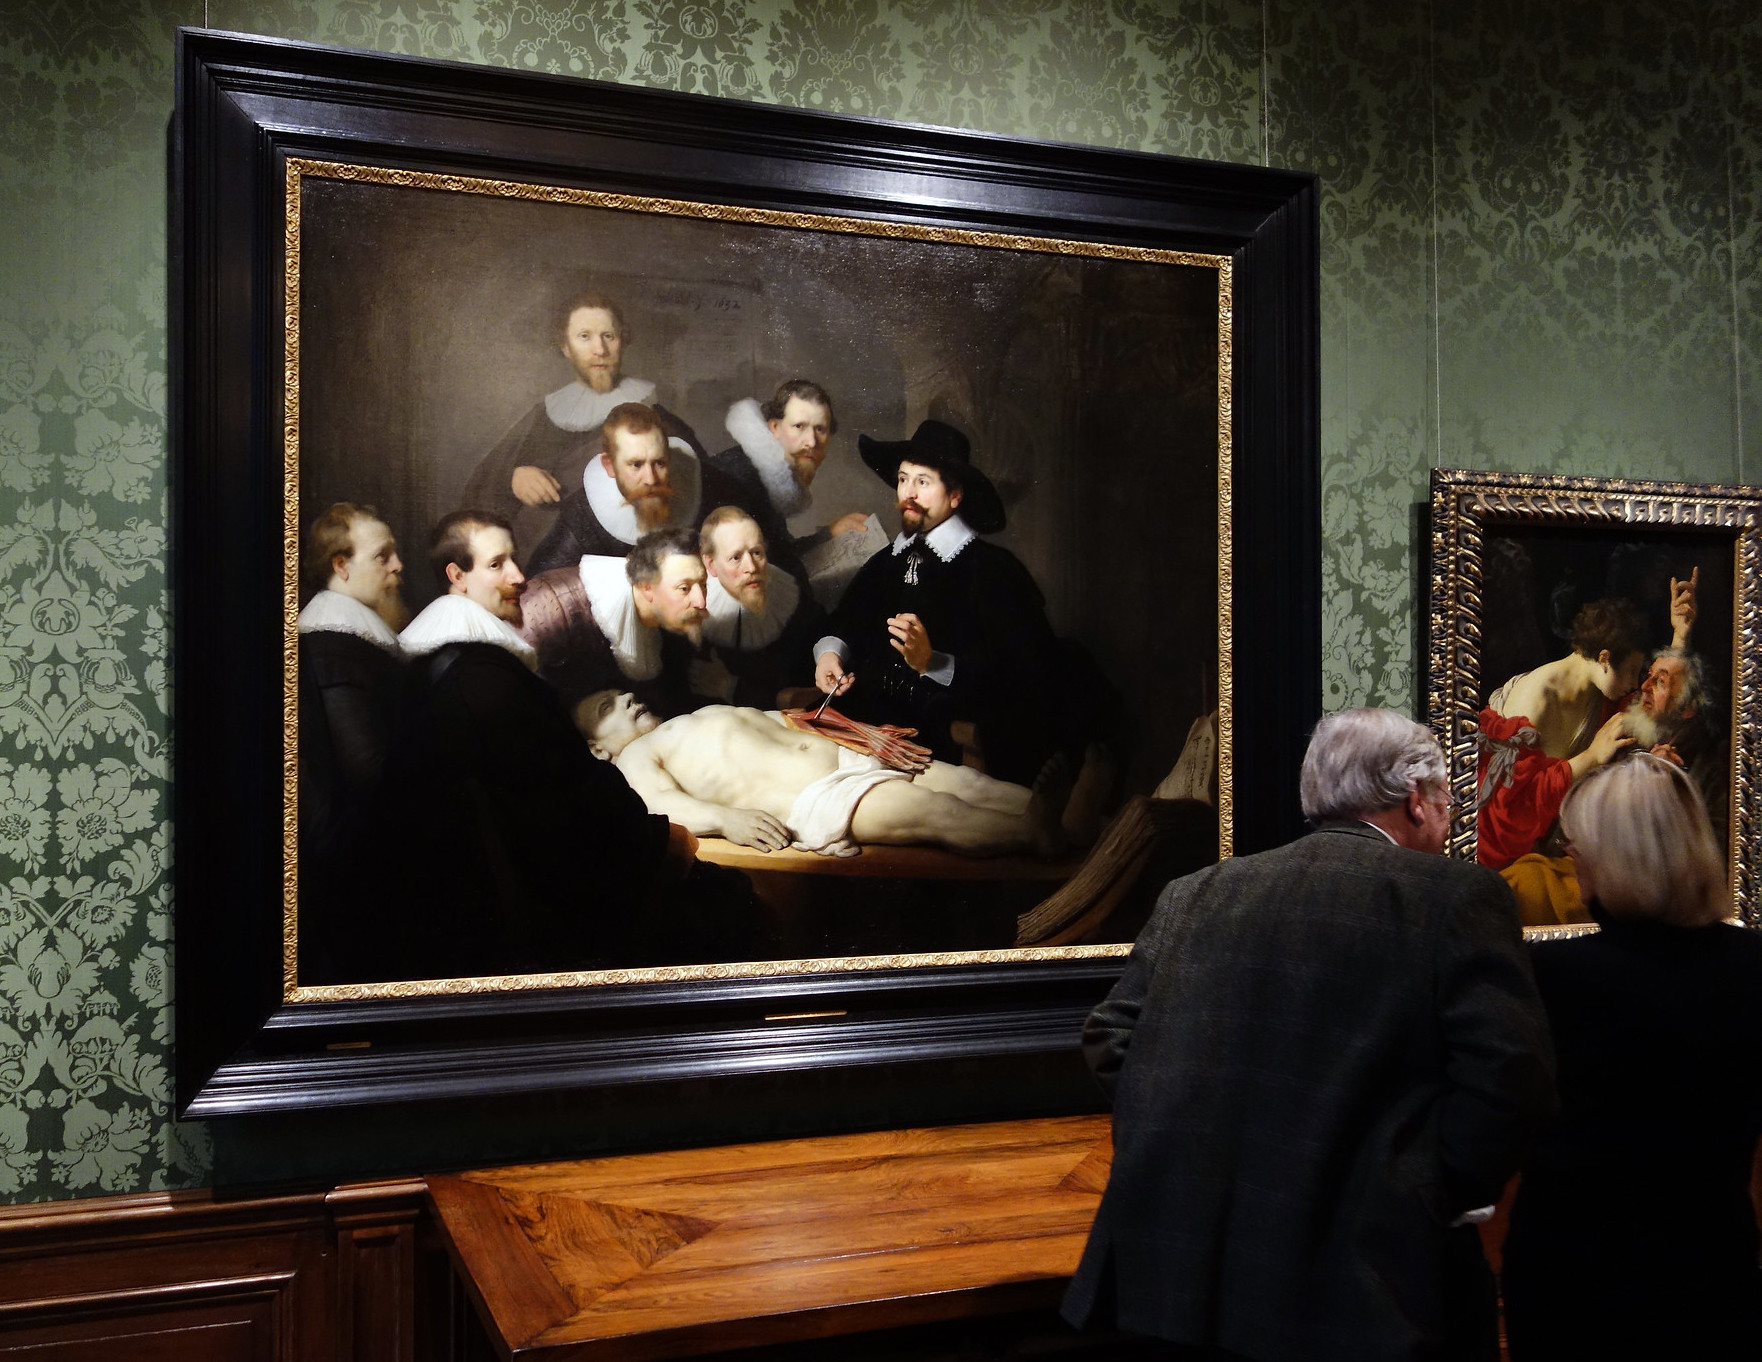 View of Rembrandt van Rijn, The Anatomy Lesson of Dr. Tulp, 1632, oil on canvas, 169.5 x 216.5 cm (Mauritshuis, The Hague, Netherlands; photo: Steven Zucker, CC BY-NC-SA 2.0)